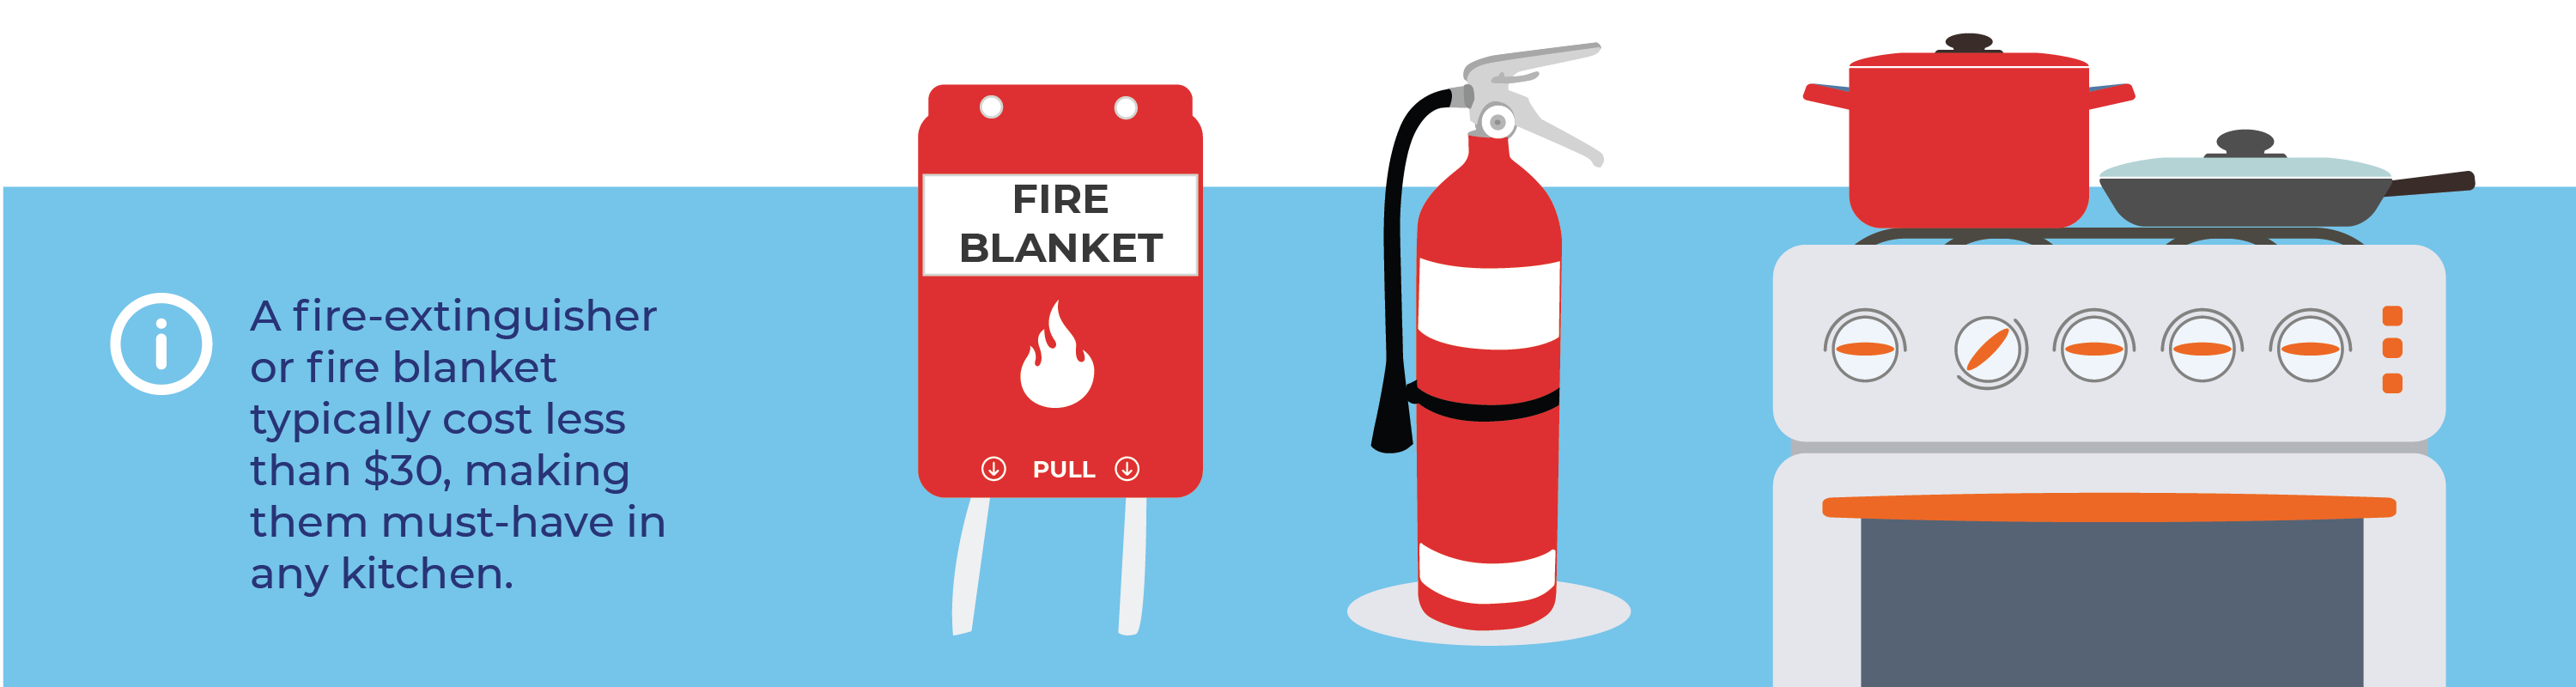 Illustration showing a fire blanket, fire extinguisher and a kitchen cooktop with pots on it